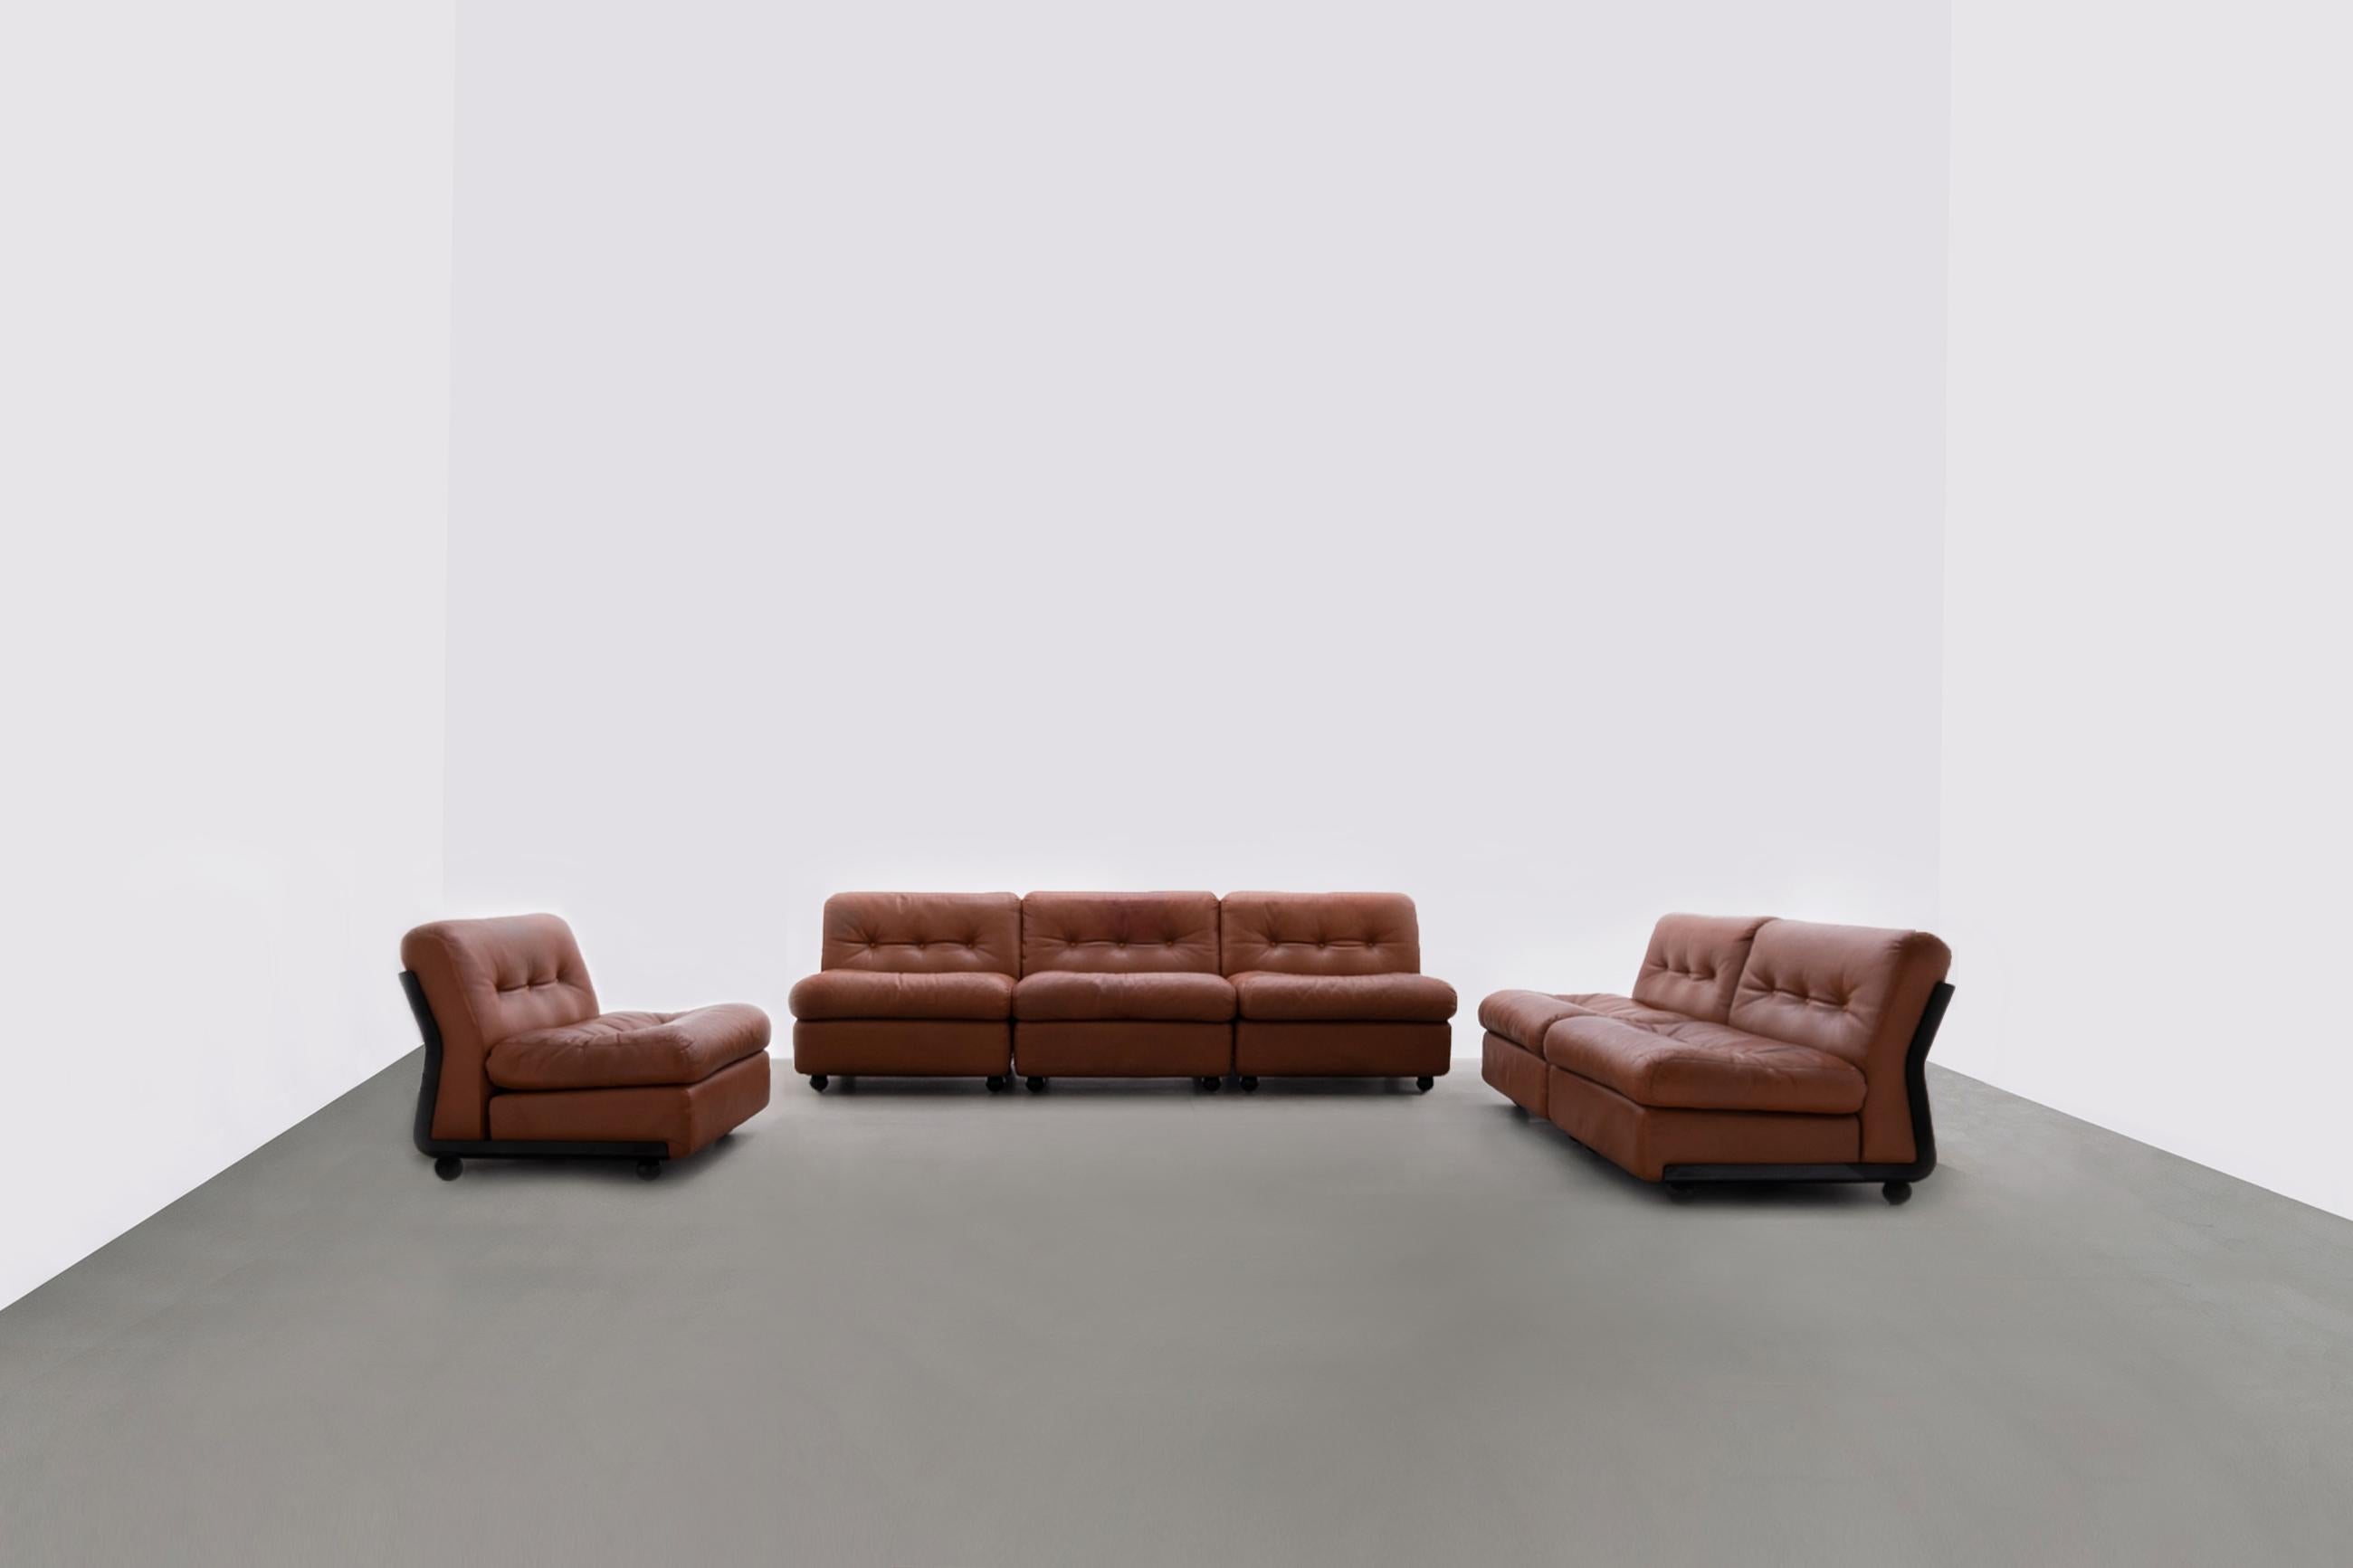 Sectional 'Amanta' sofa set by Mario Bellini for B&B Italia, Italy 1966. Black fiberglass seating shells and original cognac leather cushions. Each section can be connected to each other or placed separately as an easy chair, makes it a very playful